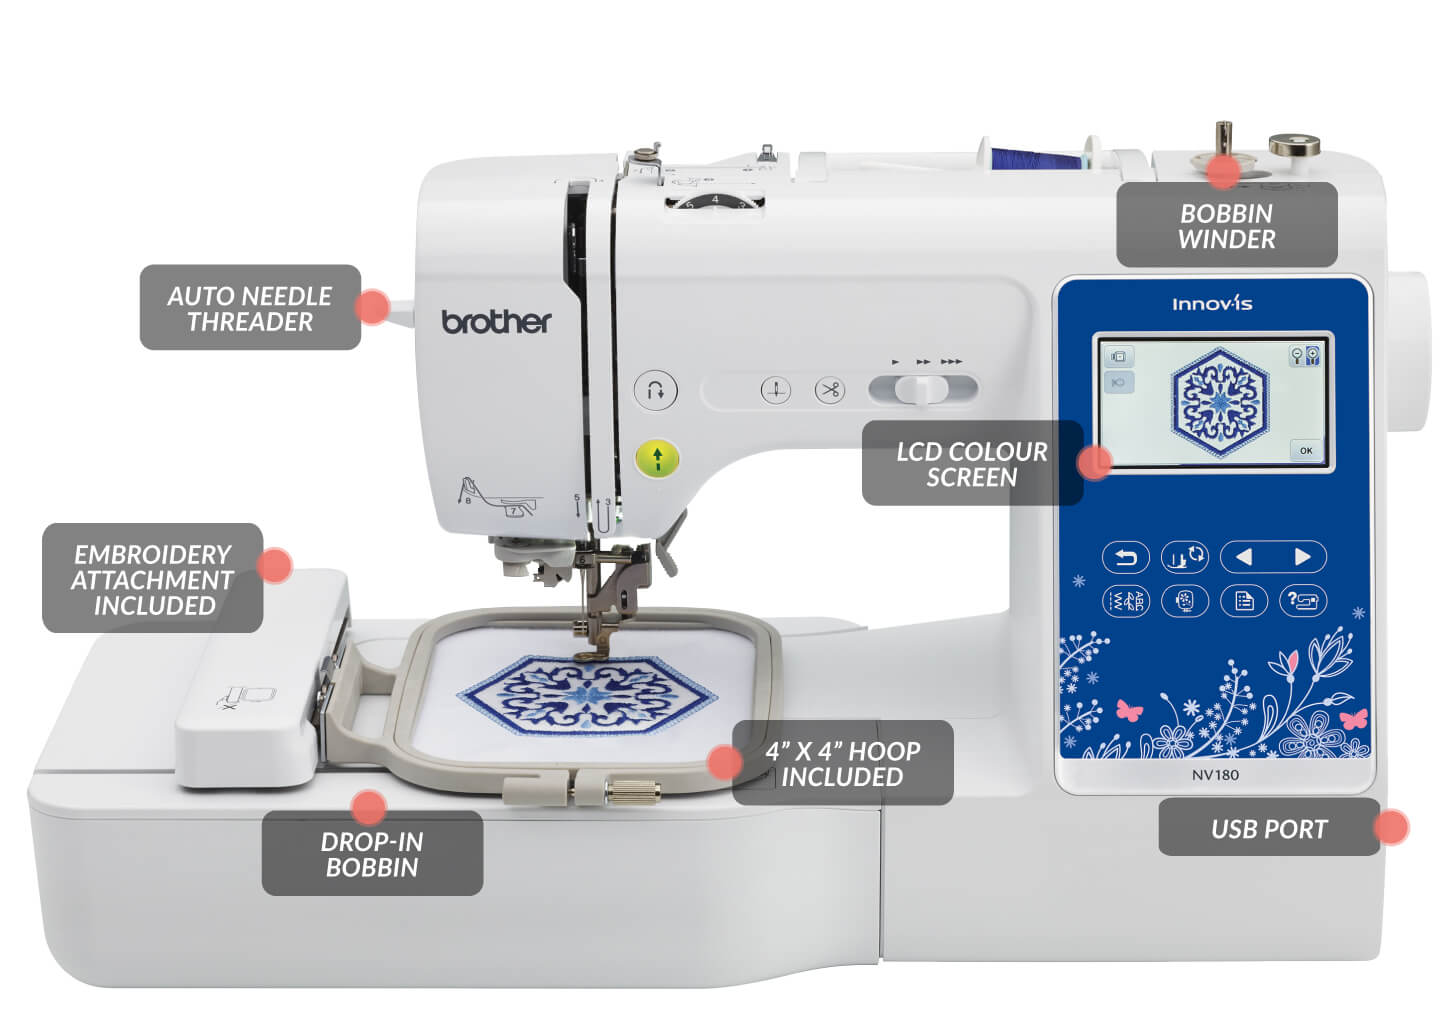 Echidna Sewing Brother NV180 sewing and embroidery machine features